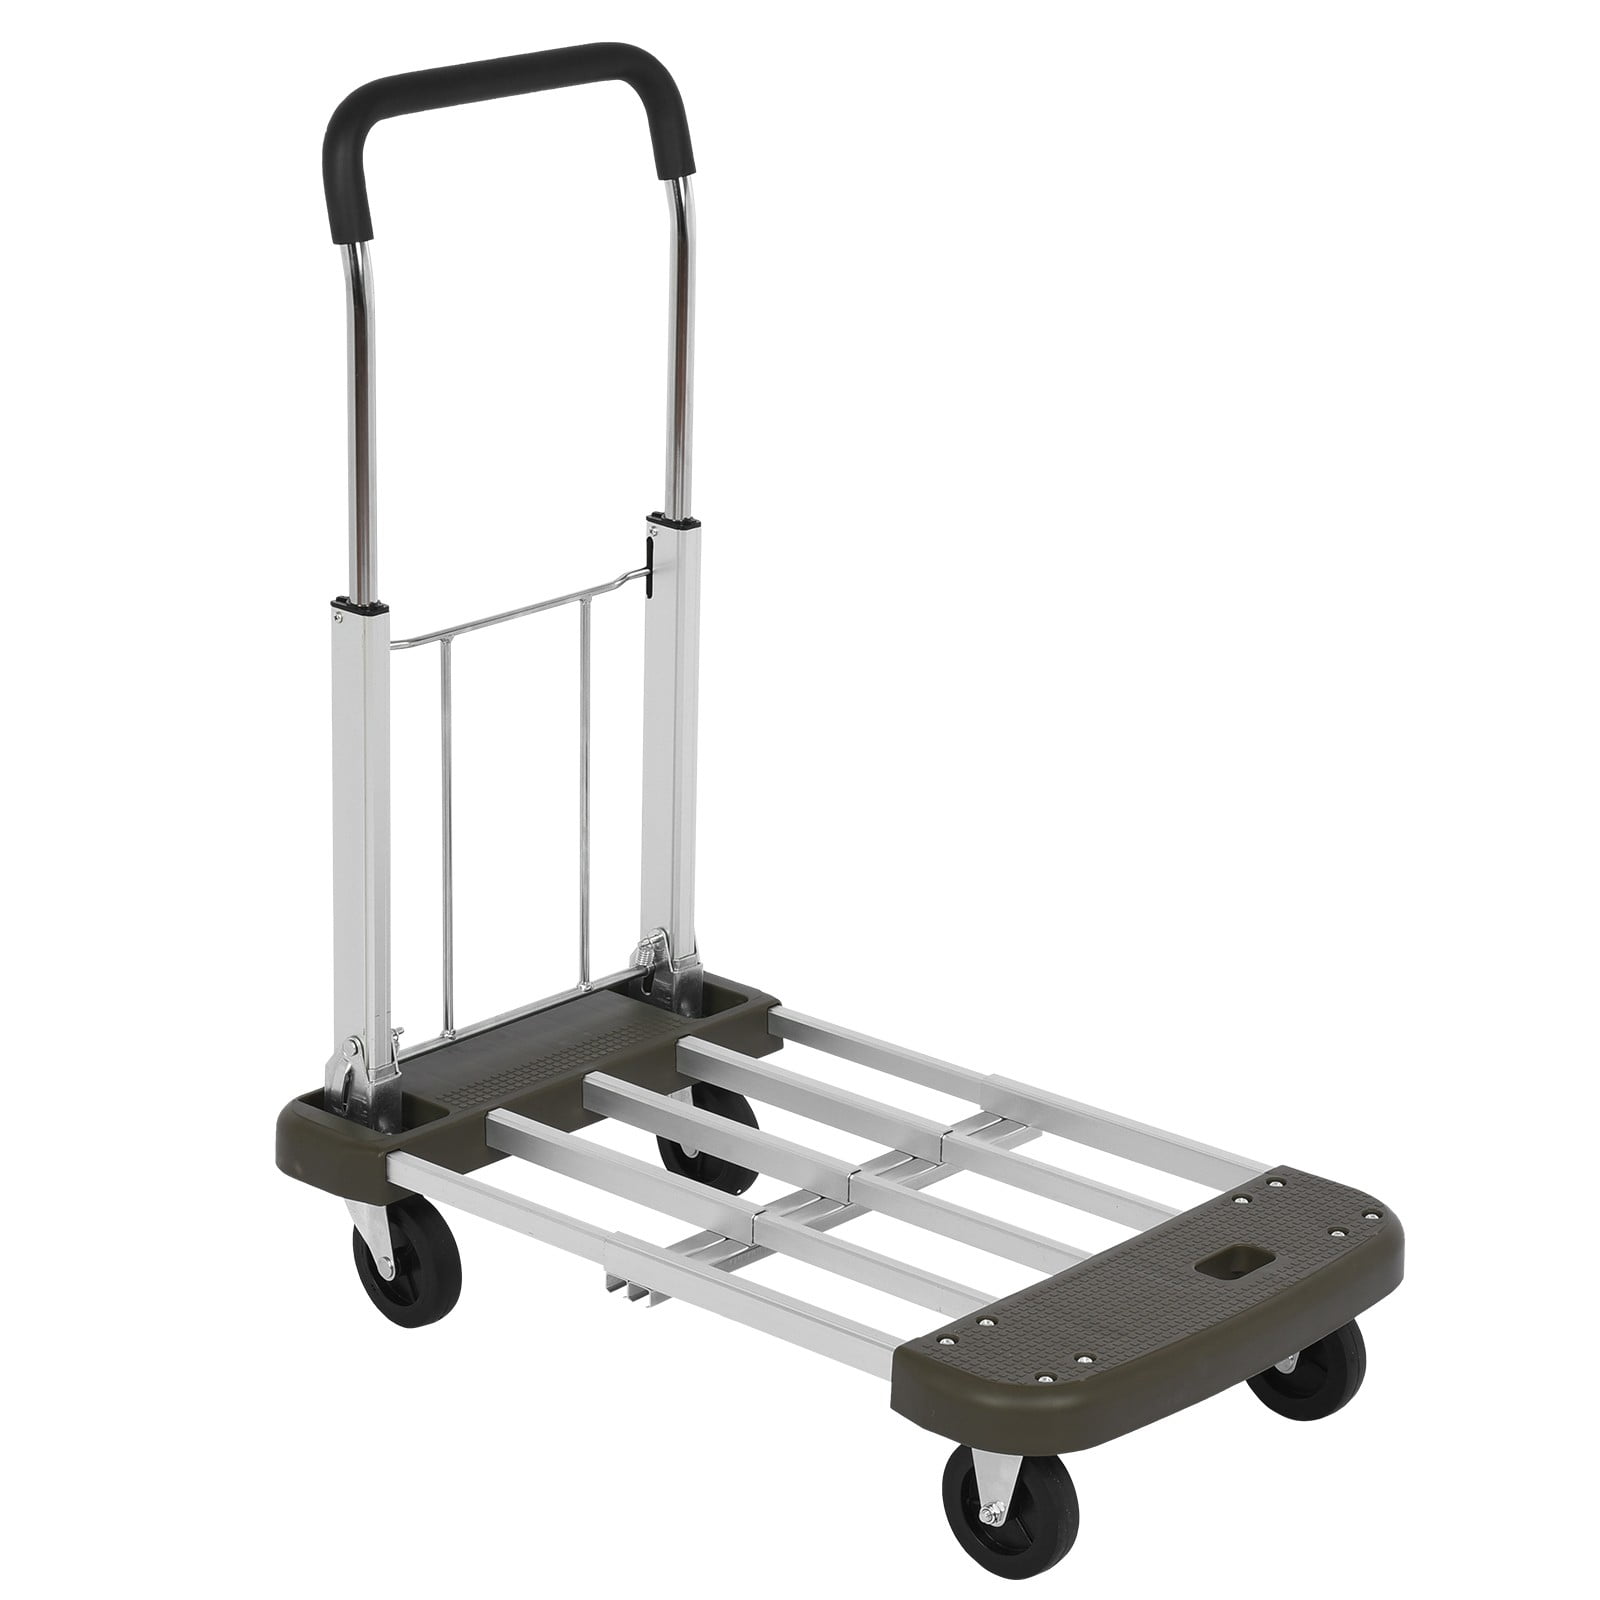 Flatbed truck Simple Small Trolley Home Lightweight Shopping cart Folding Trolley Pull cart Trailer Aluminum Alloy 